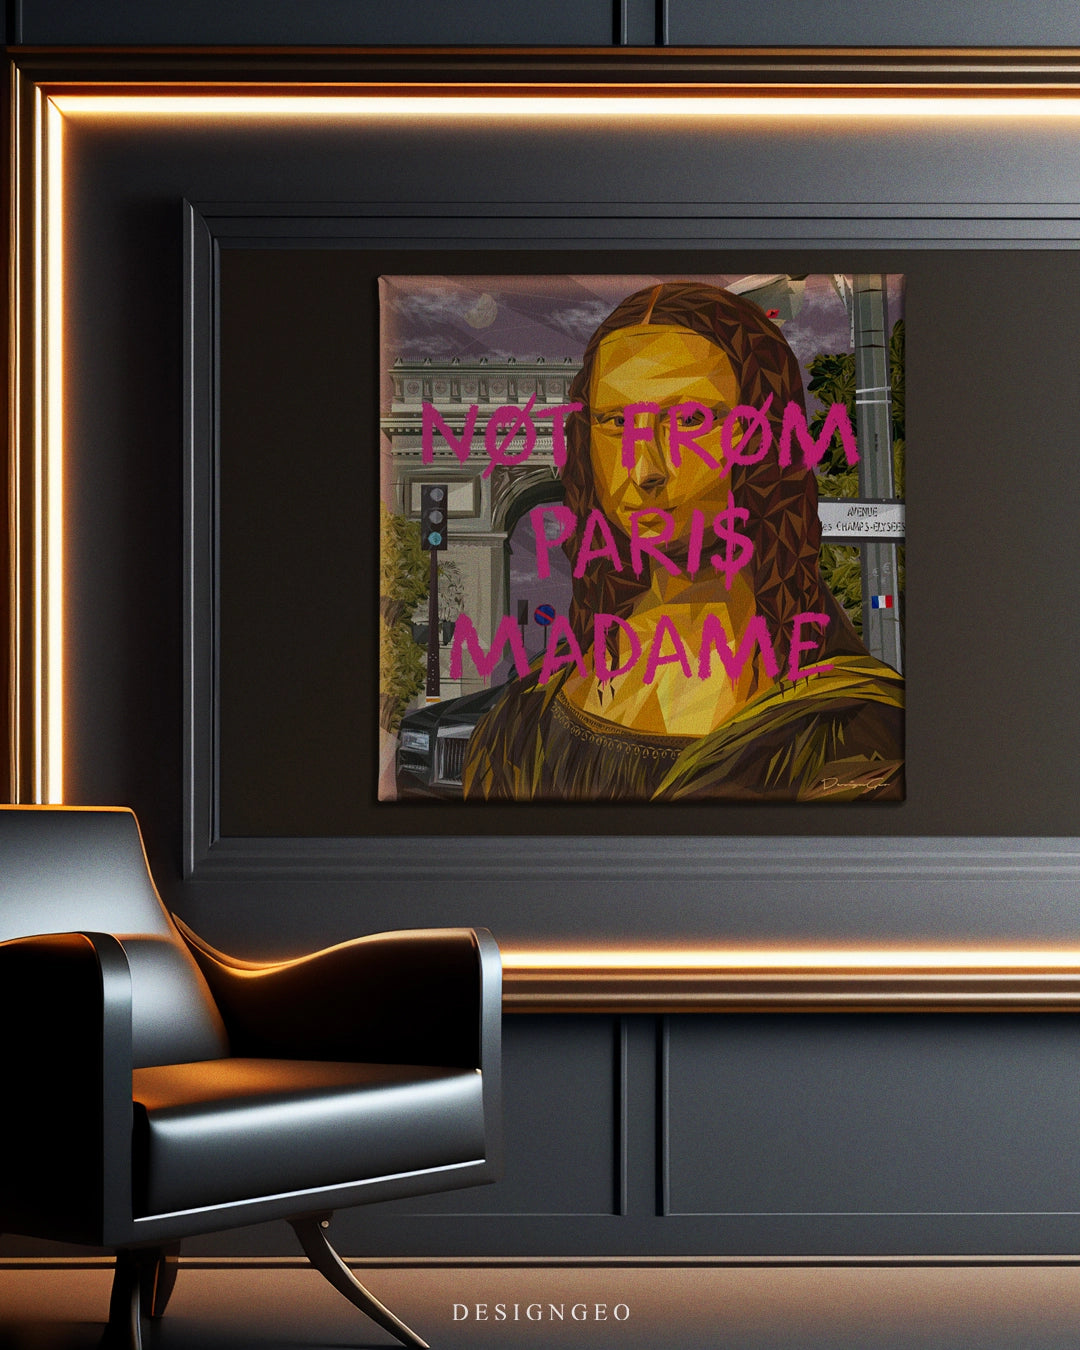 Not From Paris Art Square Canvas Print by DesignGeo